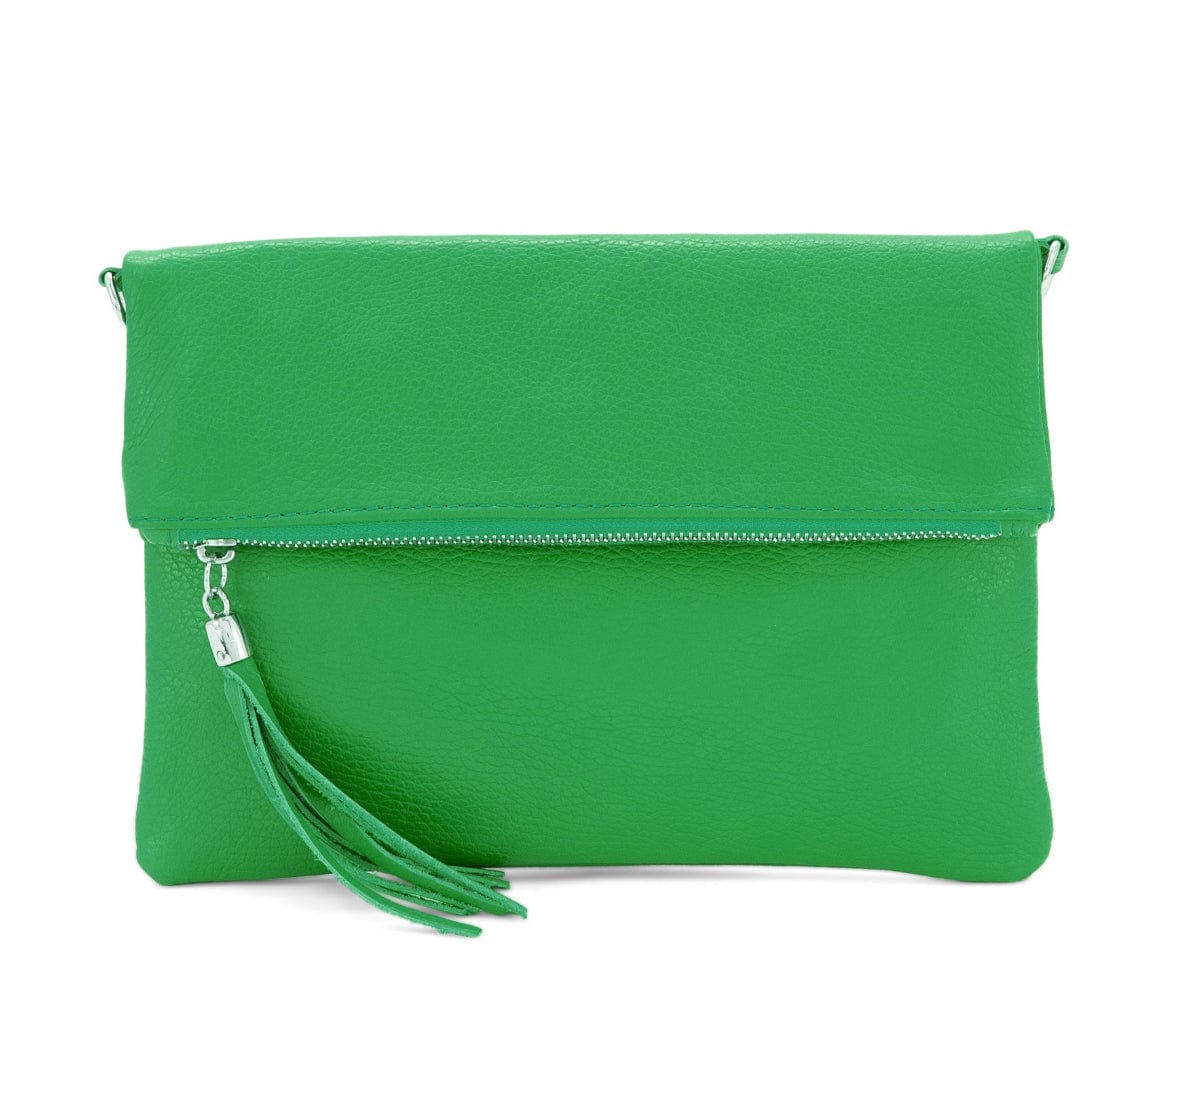 lusciousscarves Green Italian Leather Fold Over Clutch Bag with Tassel.